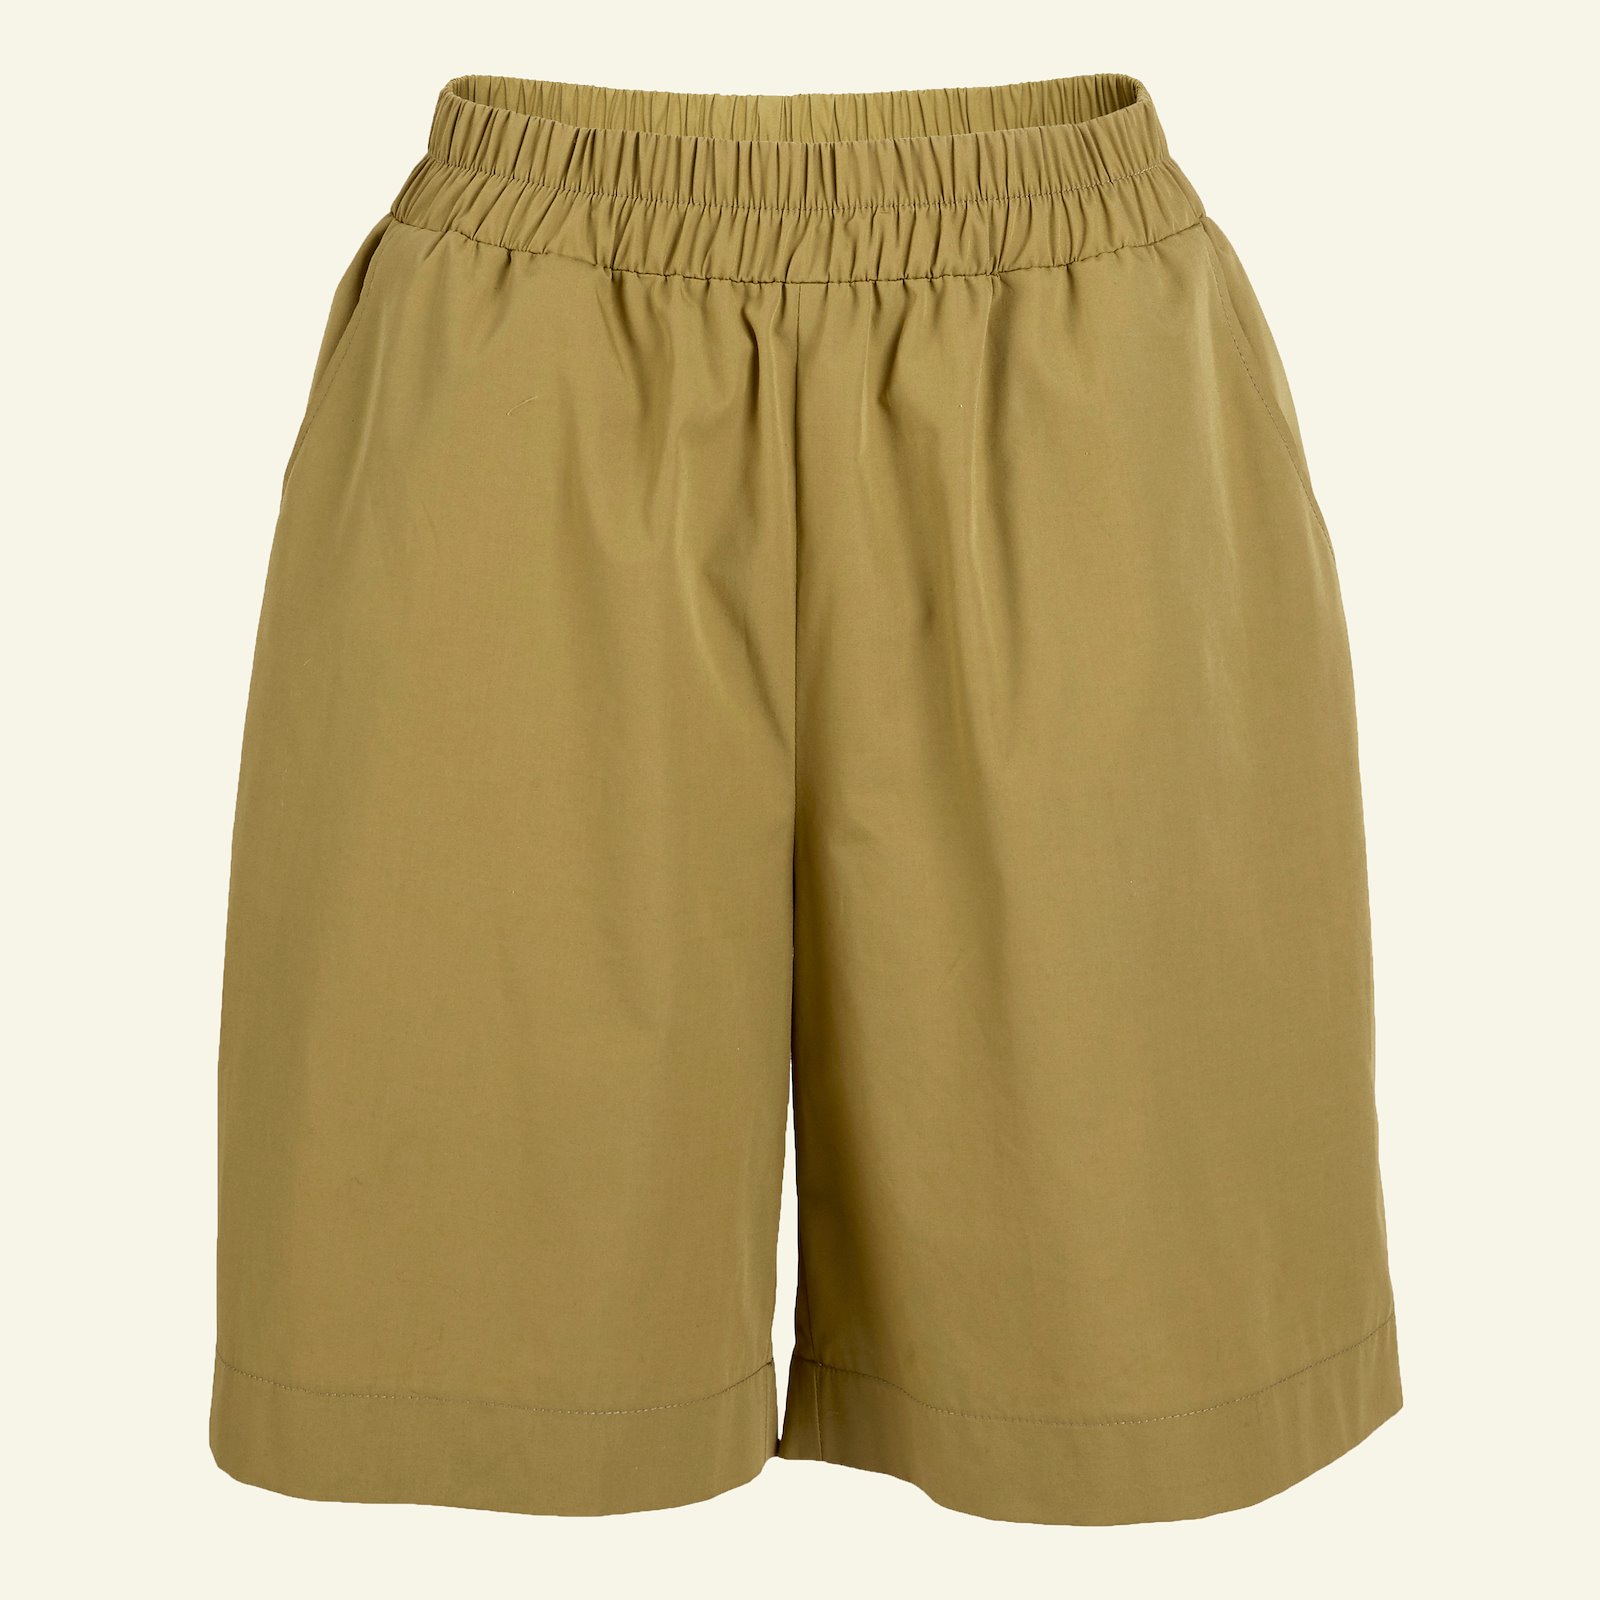 Wide trousers/shorts w. pockets, 46/18 p20051_501926_sskit